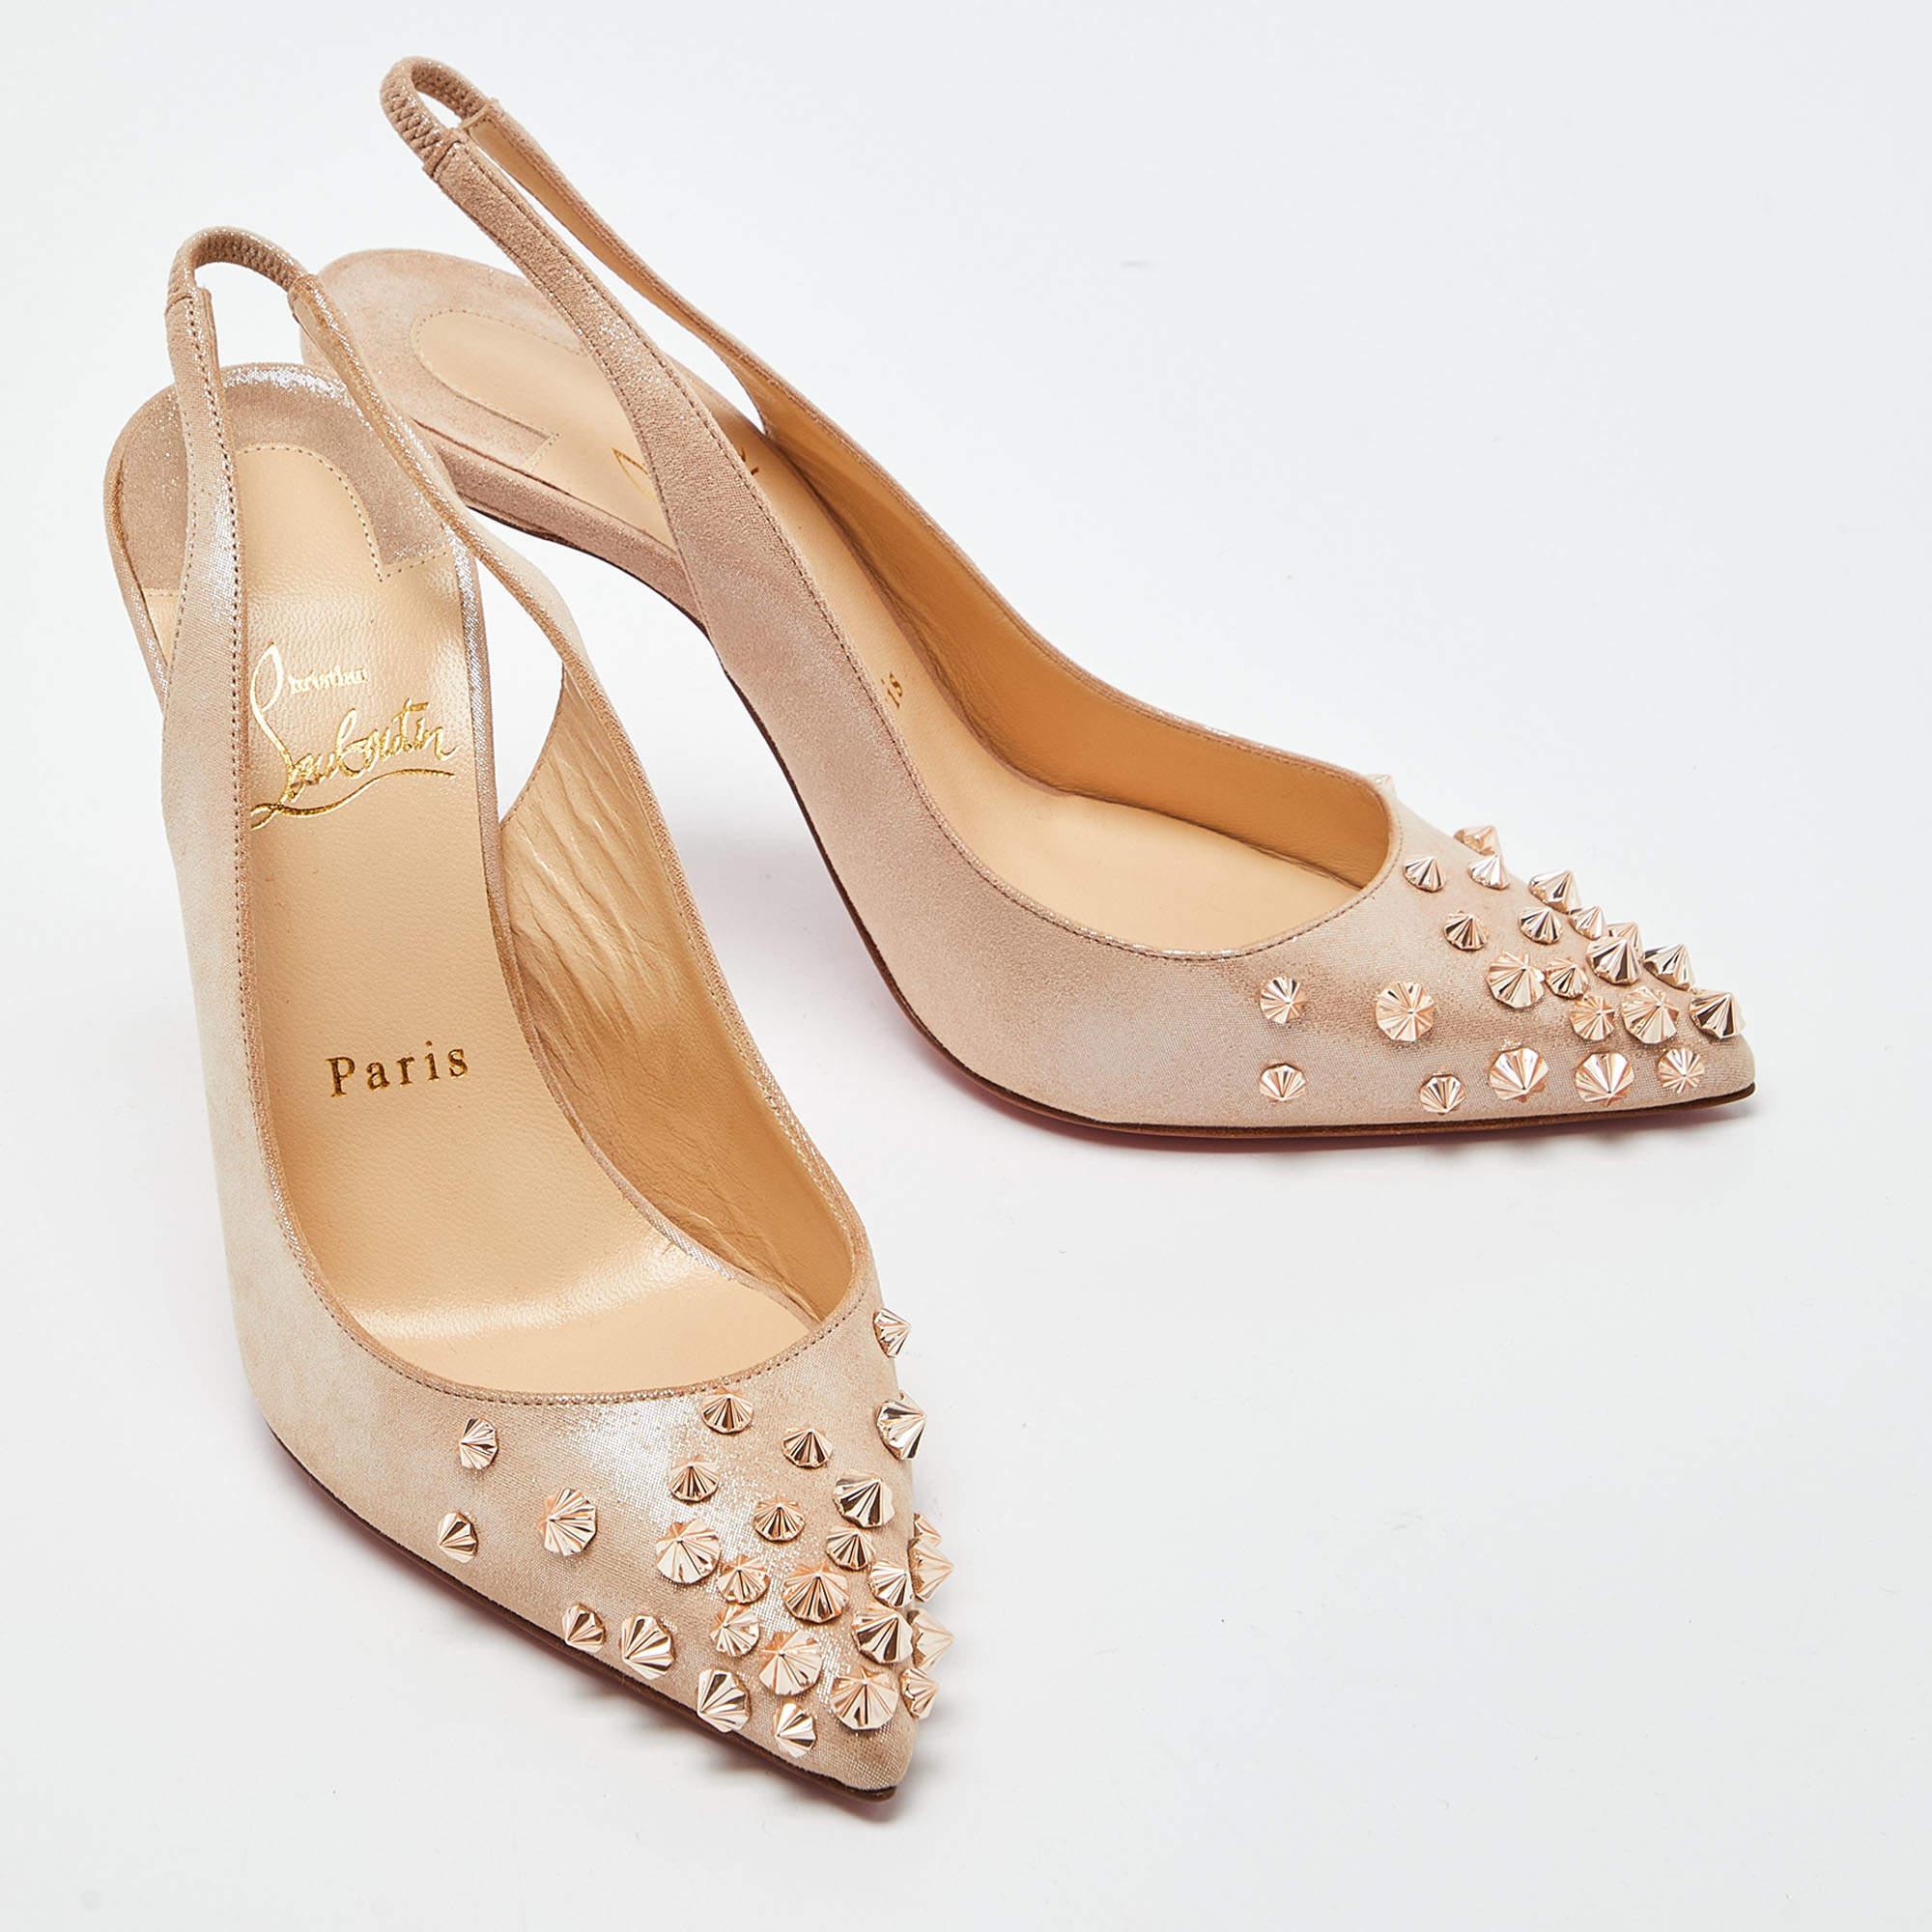 Christian Louboutin Beige Iridescent Suede Drama Spikes Pumps Size 37 1